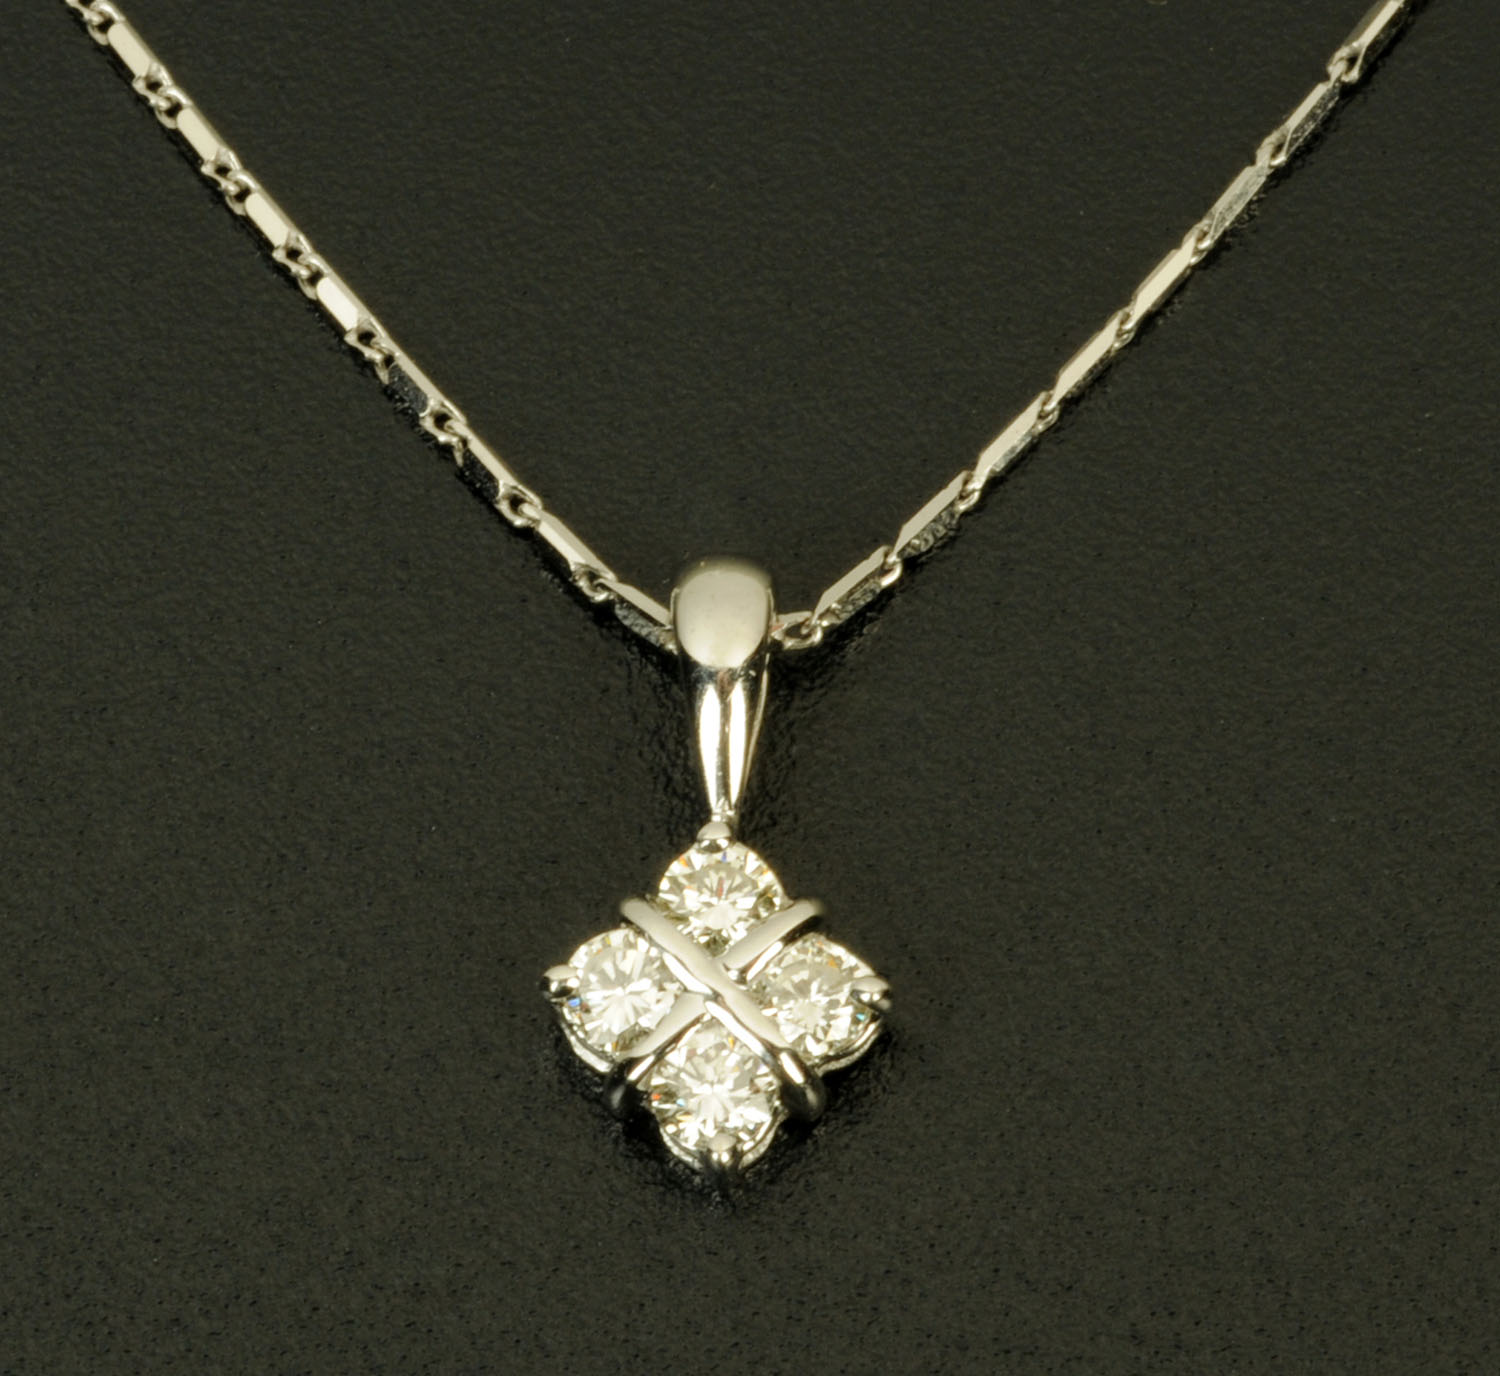 An 18 ct white gold pendant on chain, set with diamonds weighing +/- .34 carats.